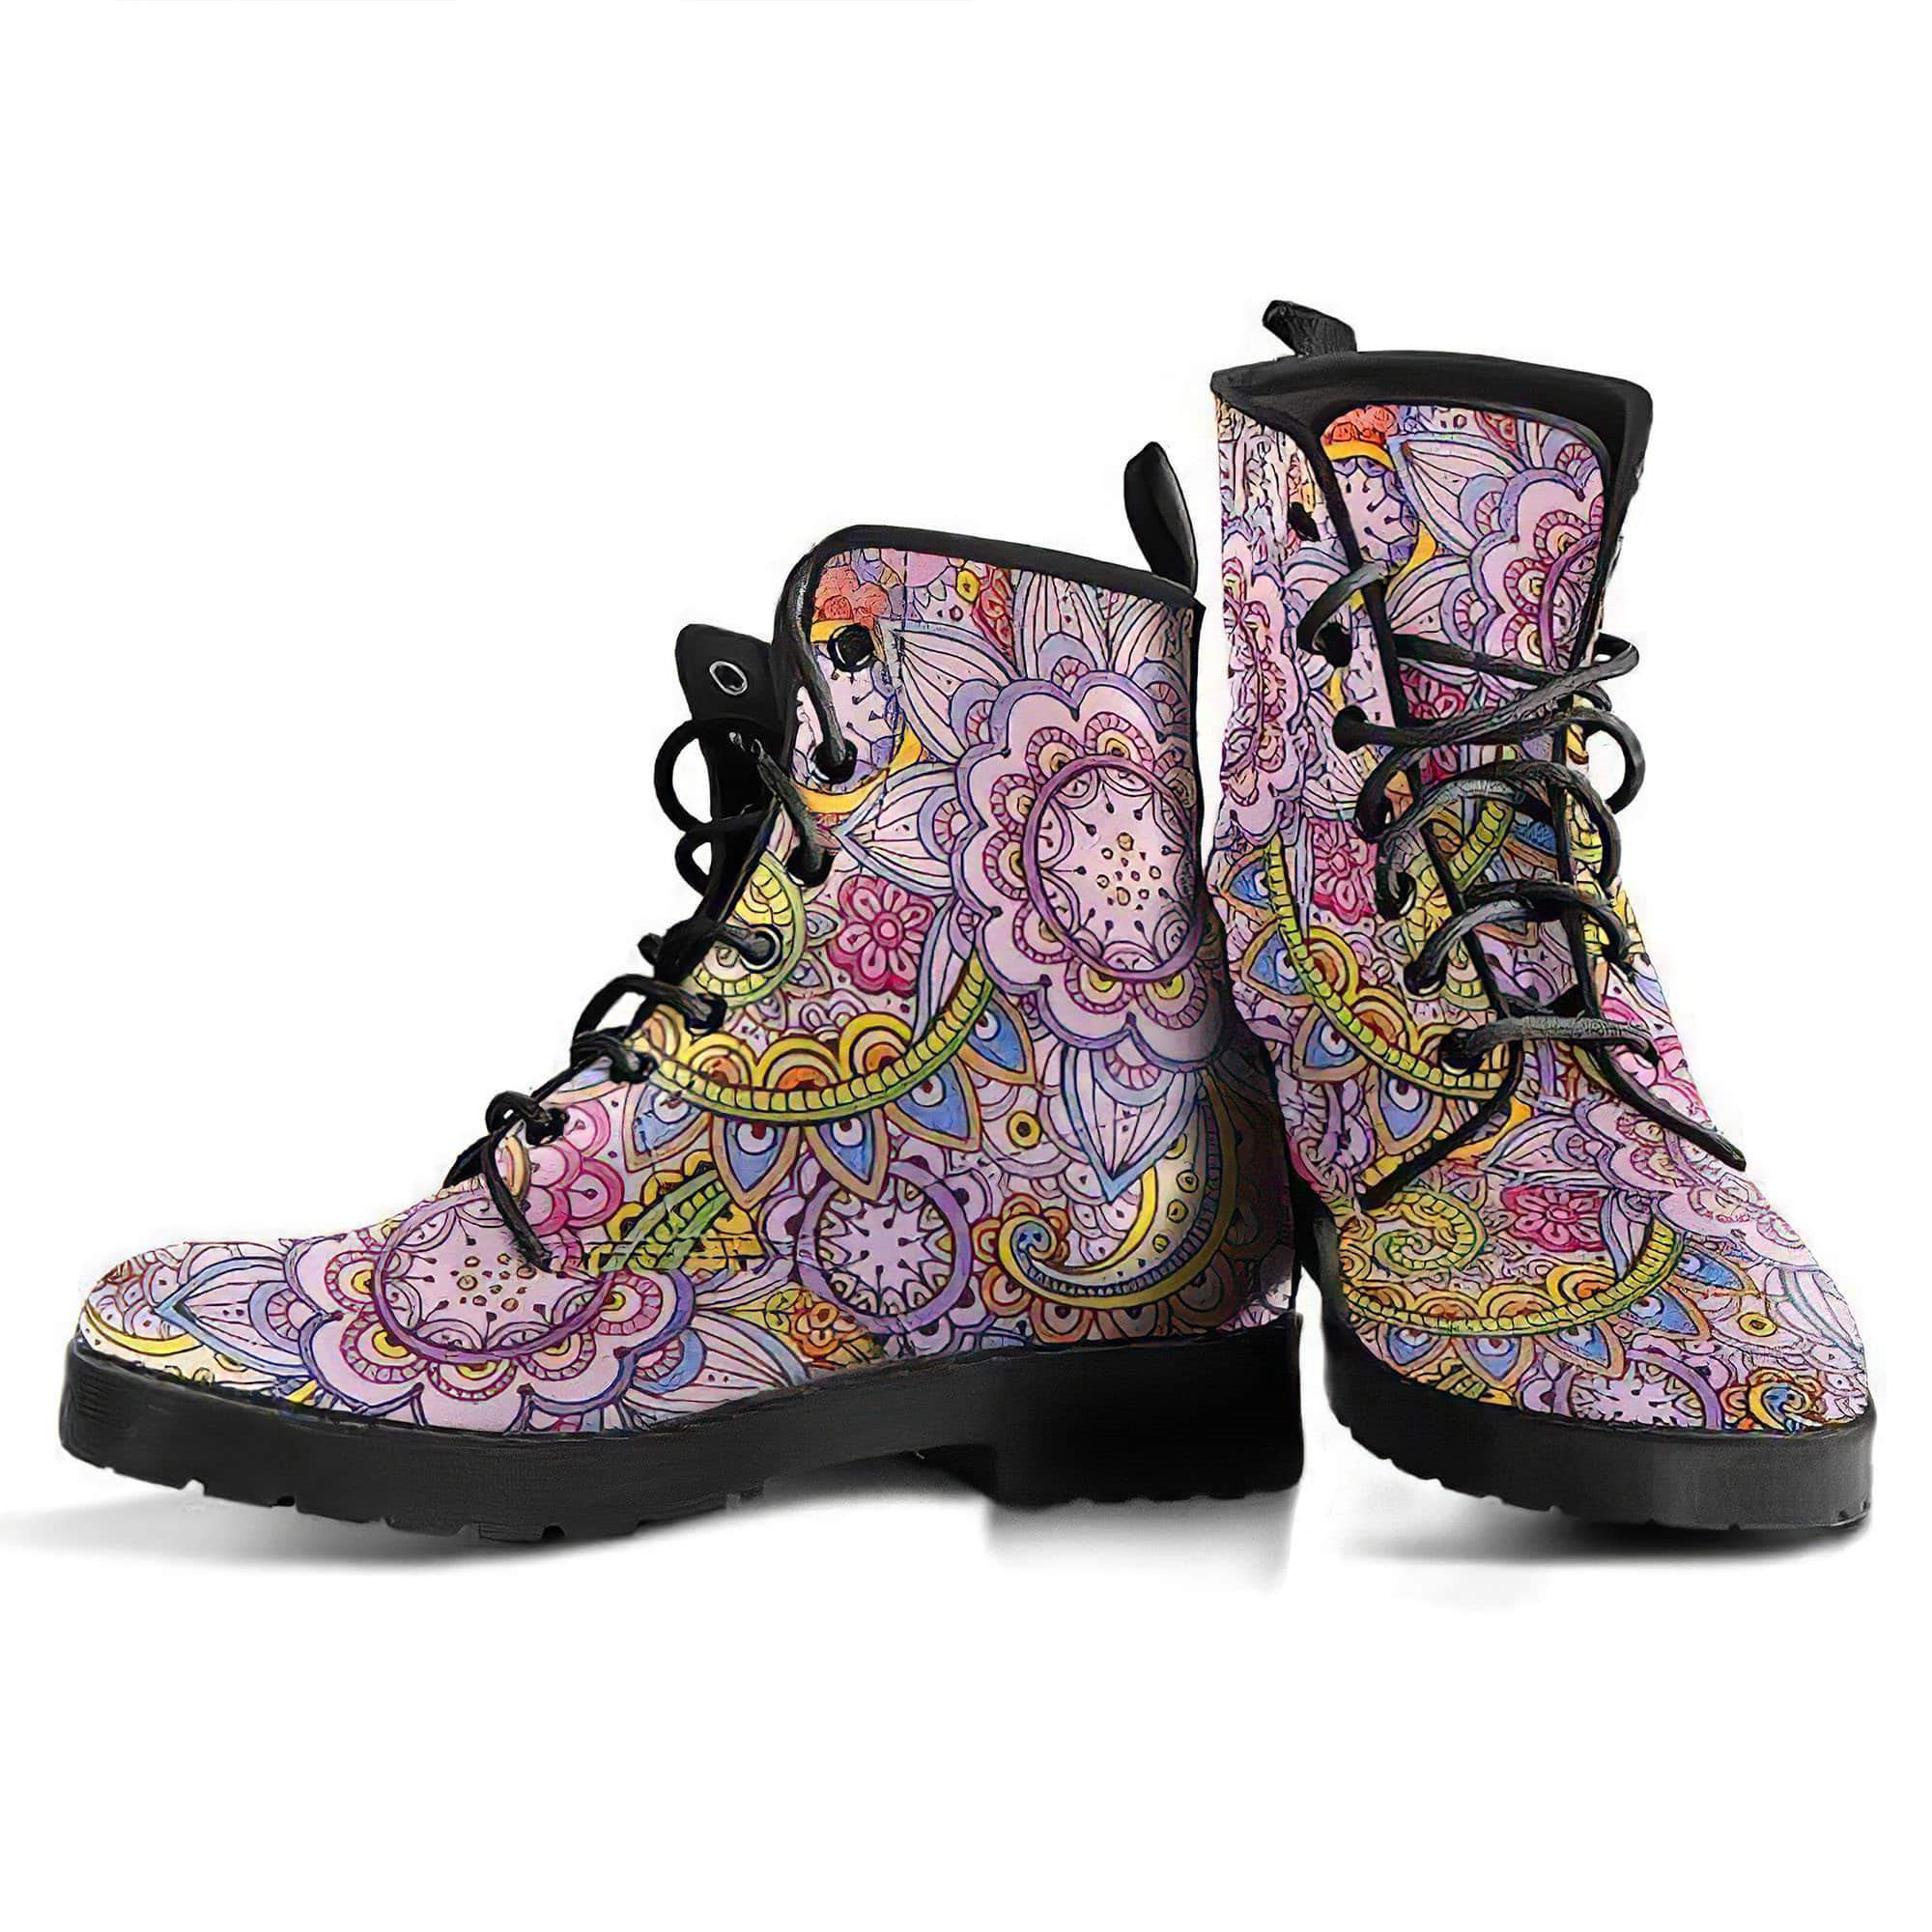 floral-mandala-women-s-leather-boots-women-s-leather-boots-12051851706429.jpg